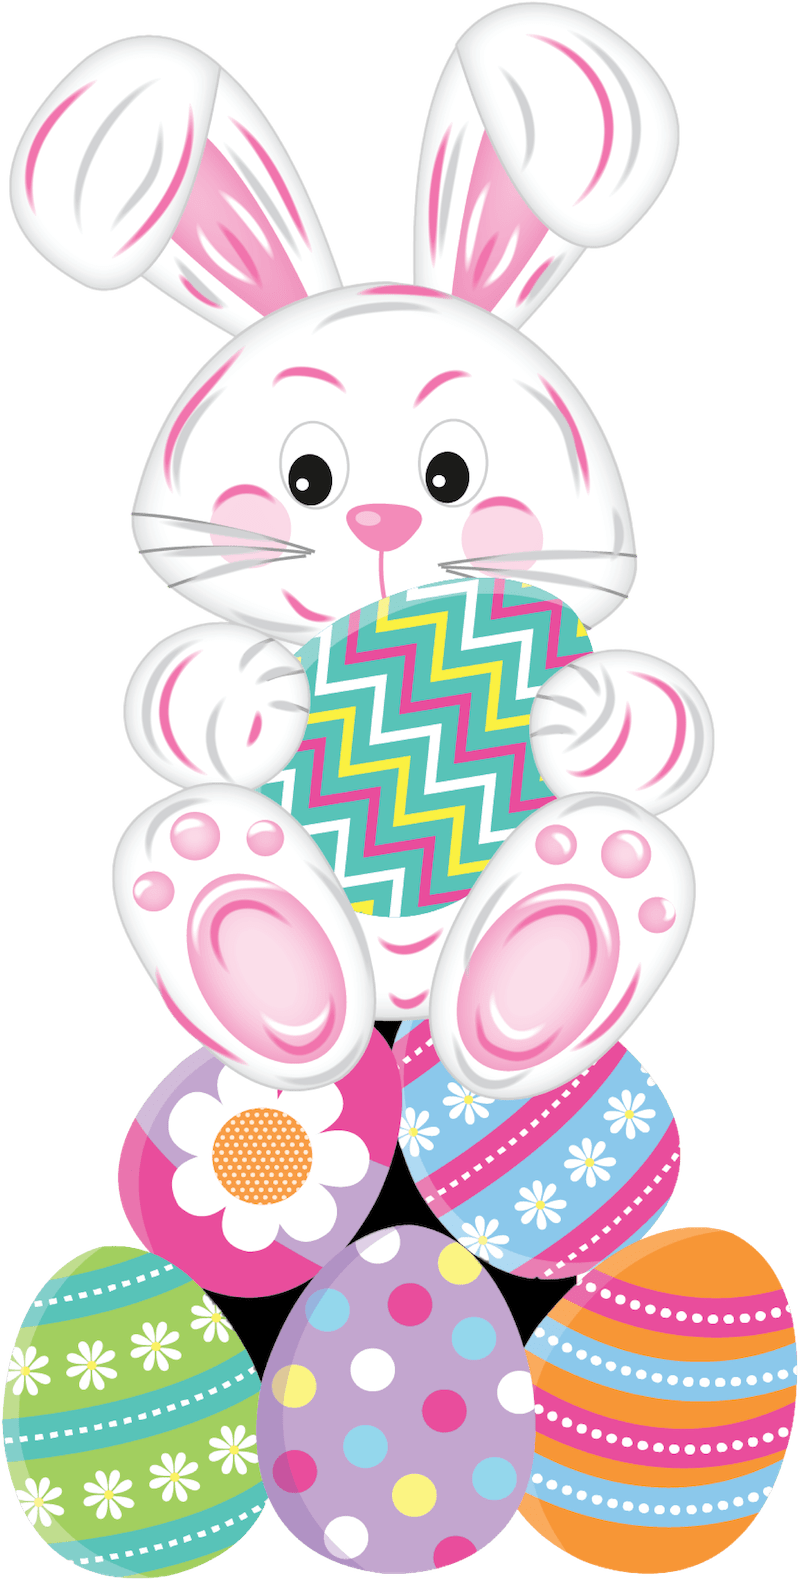 Happy Easter Bunny Sits on Stacked Eggs Outdoor Decoration